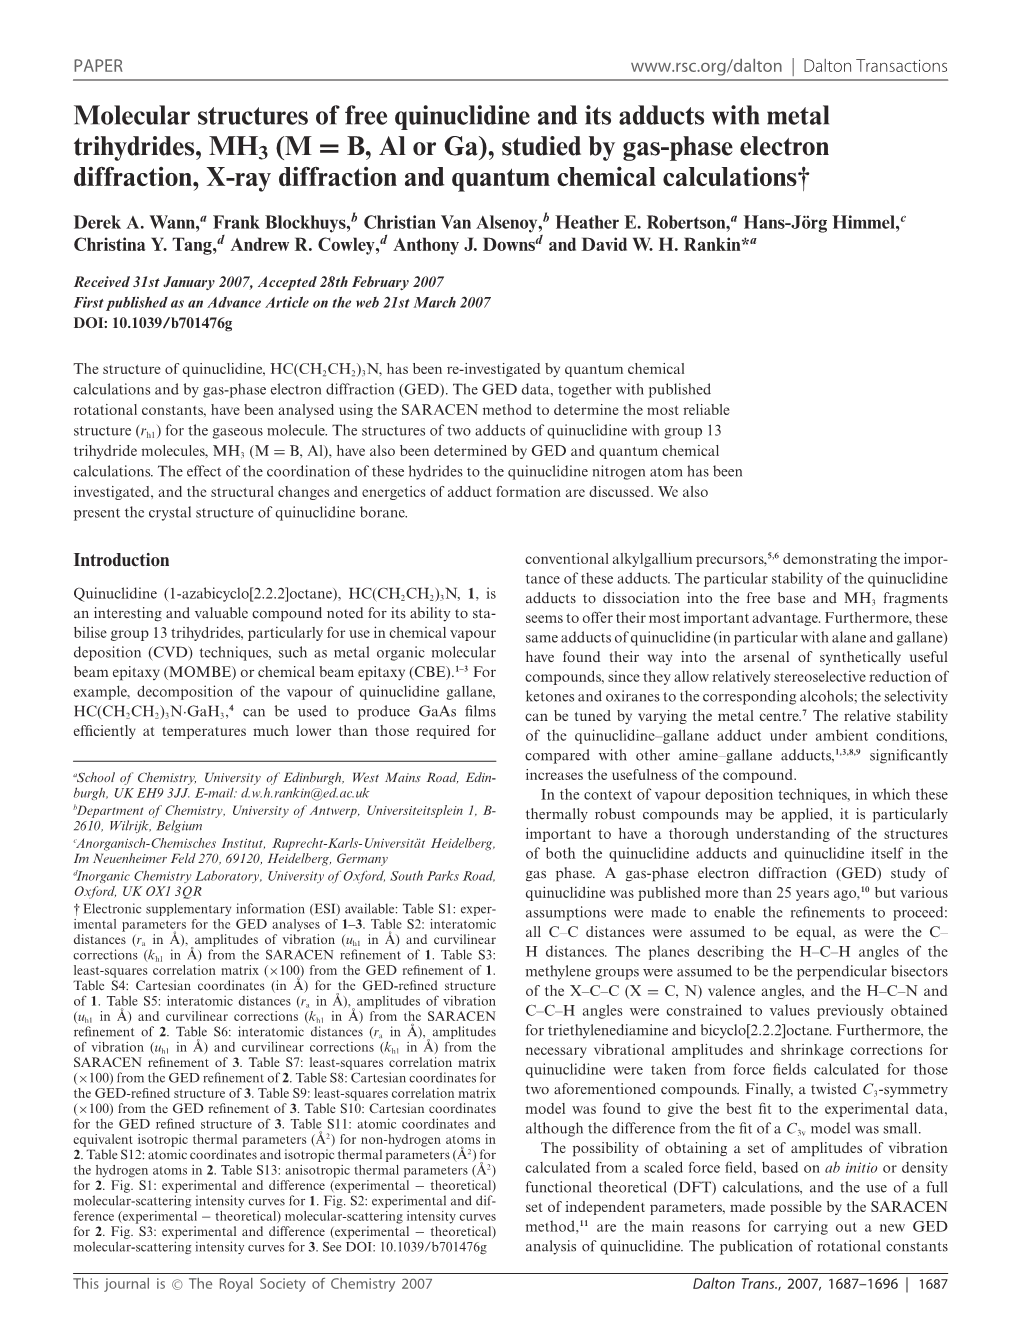 Molecular Structures of Free Quinuclidine and Its